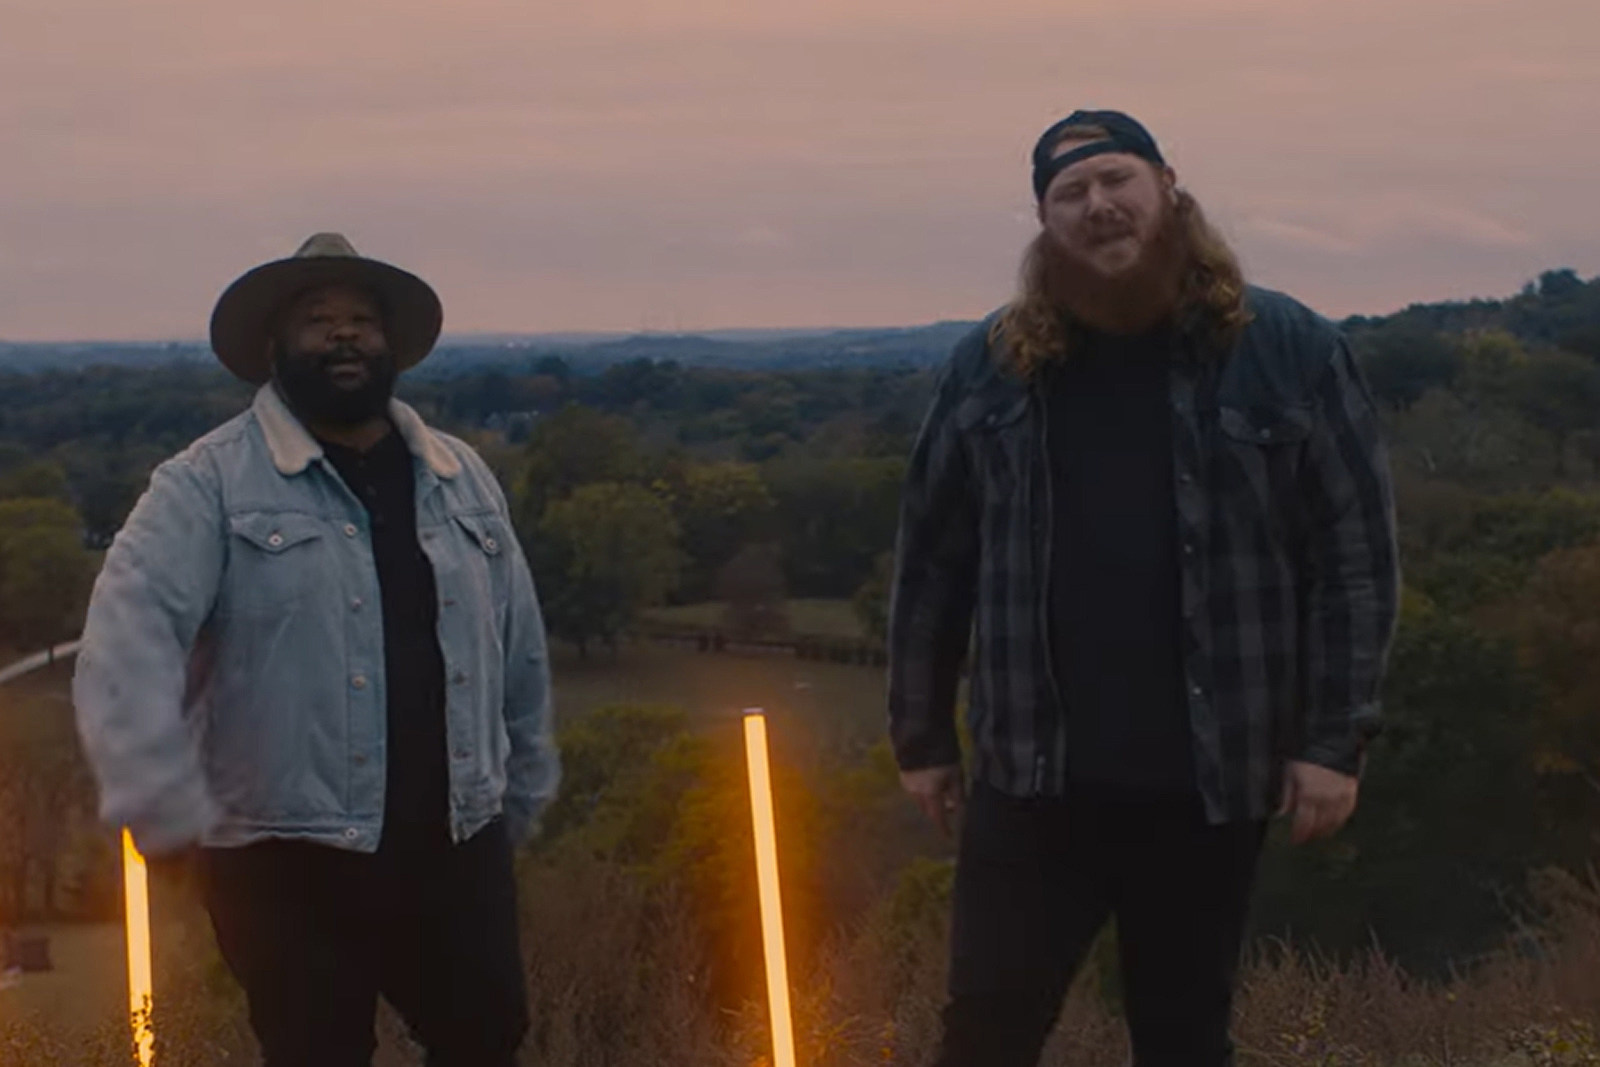 Will Neon Union Head Up the Week's Top Country Videos?